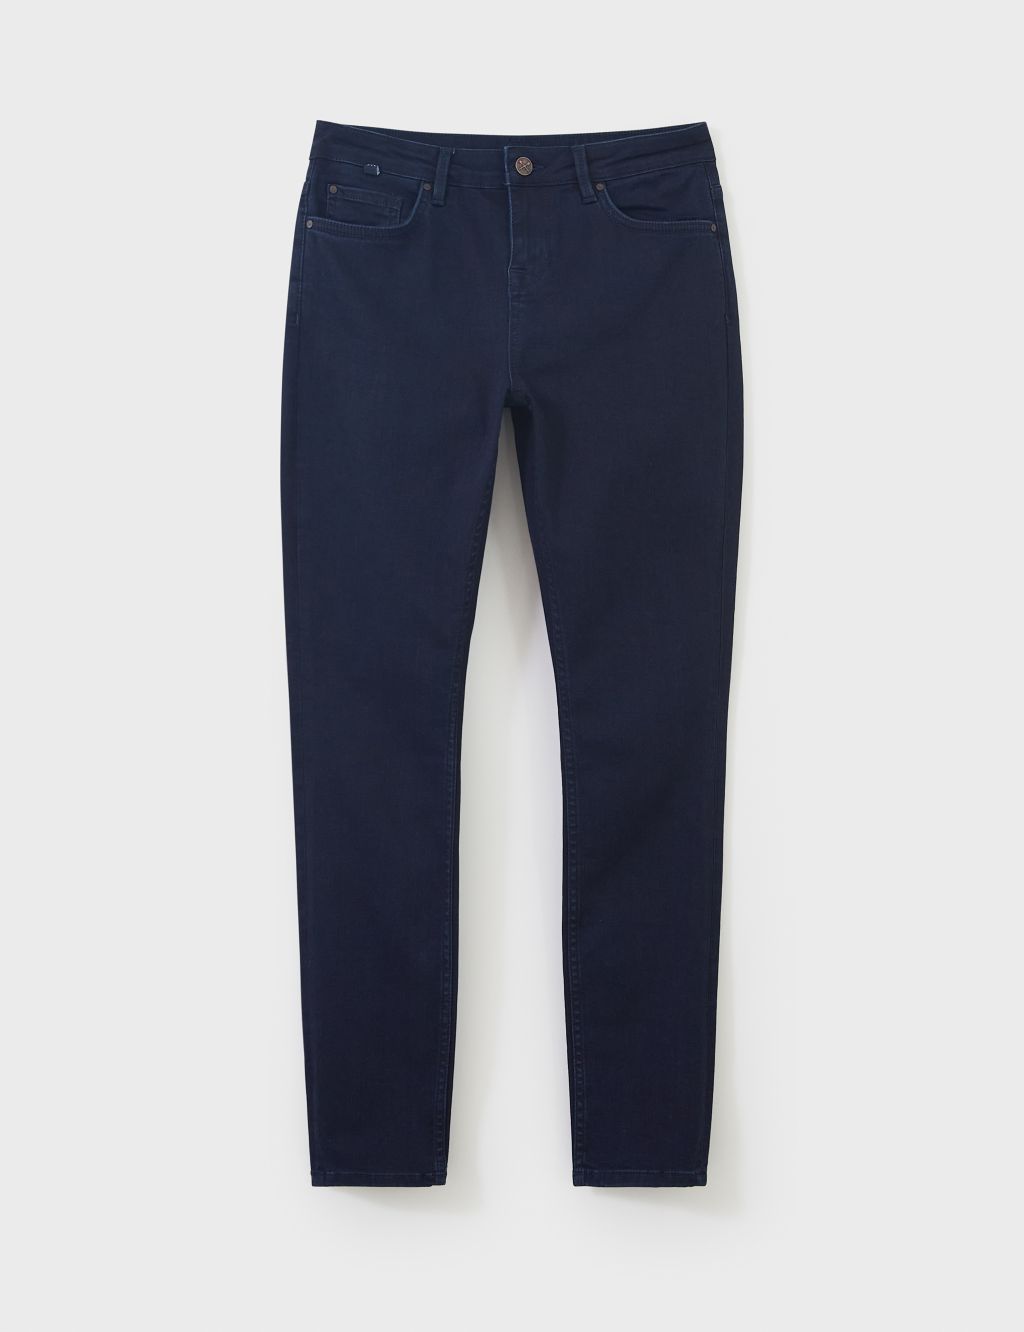 Skinny Jeans with Tencel™ image 2